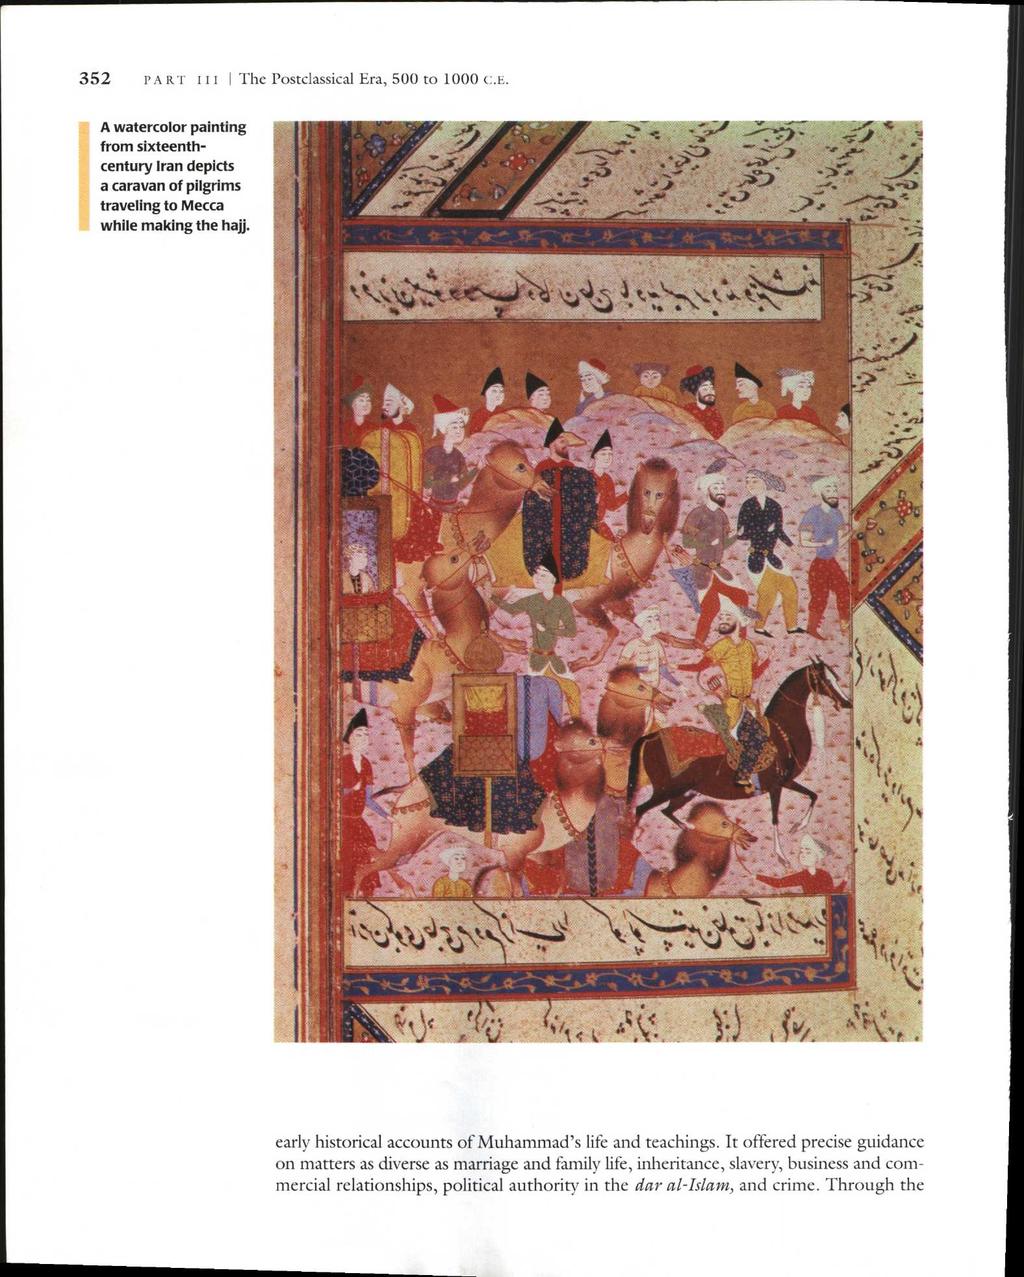 352 PA RT iii I The Postclassical Era, 500 to 1000 A watercolor painting from sixteenthcentury Iran depicts a caravan of pilgrims traveling to Mecca while making the hall.